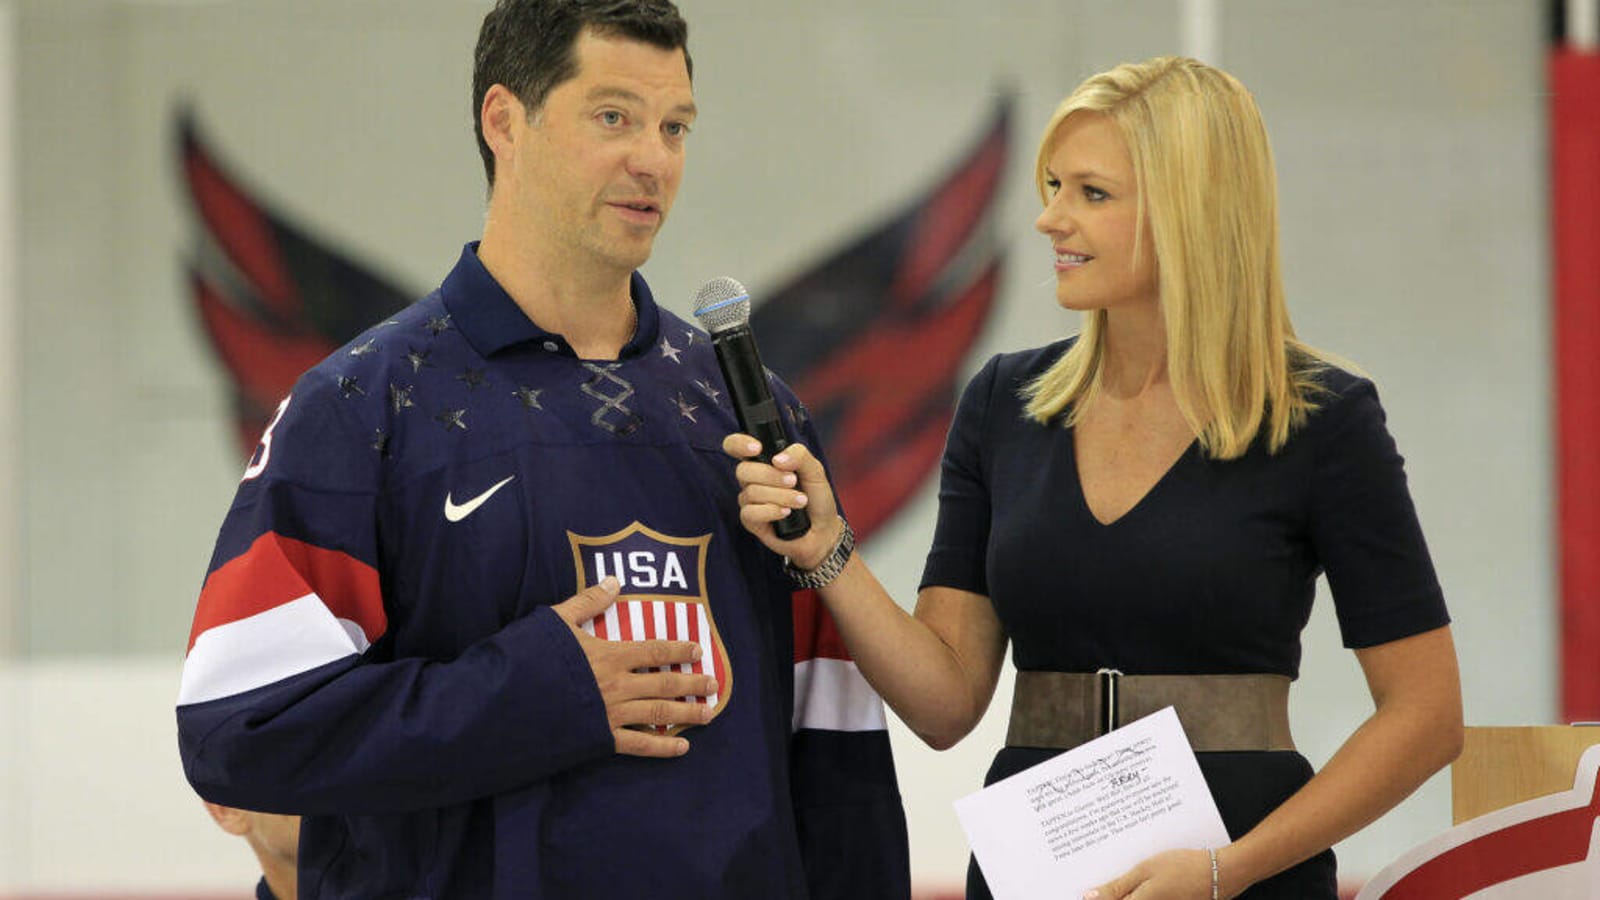 Bill Guerin Named USA General Manager for 2025 4 Nations Face-Off and 2026 Olympics